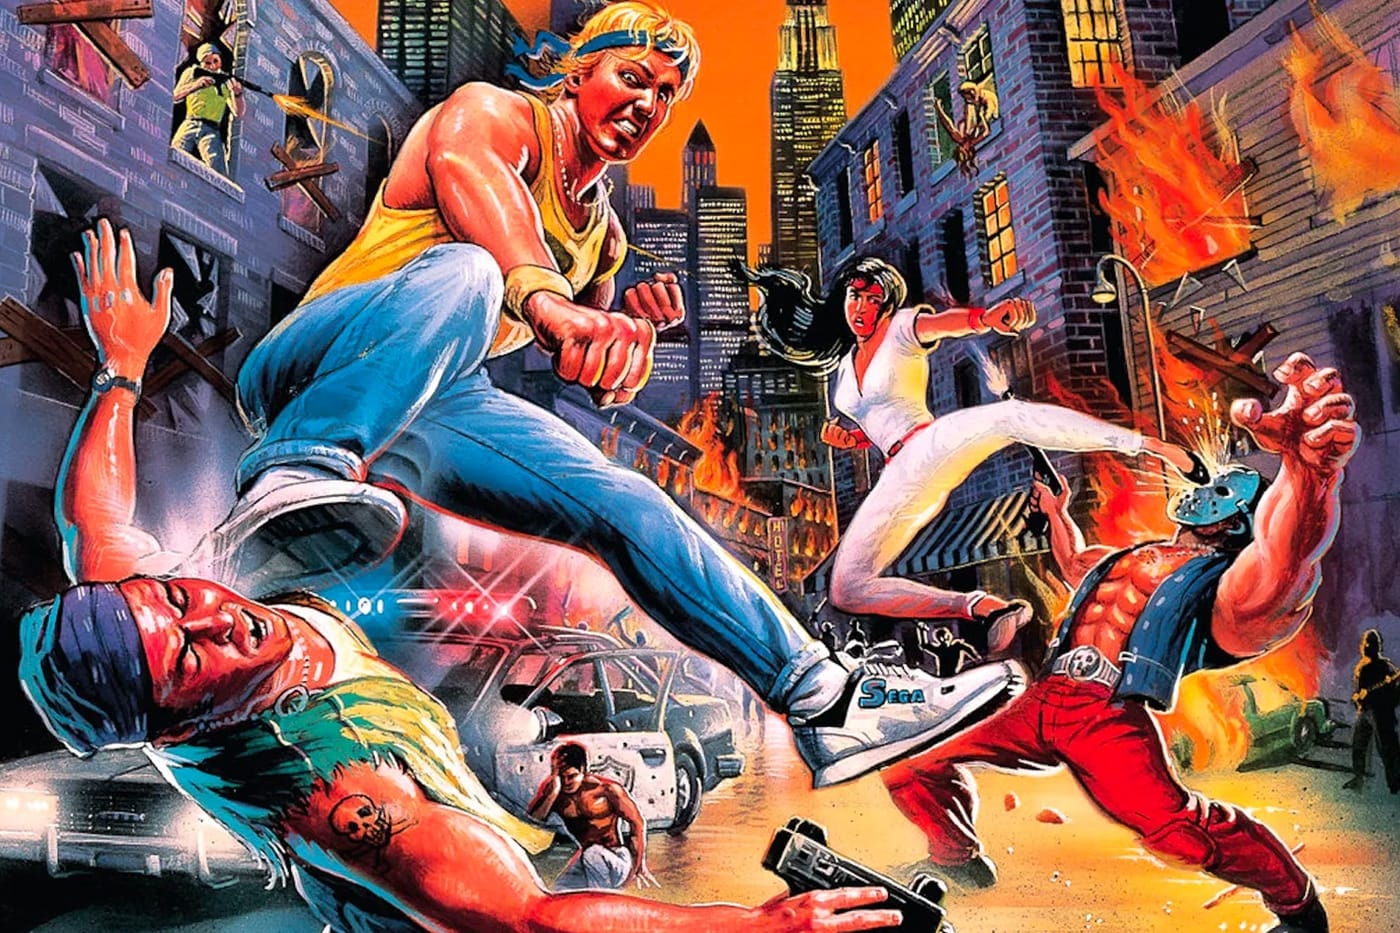 Sega Rebooting Crazy Taxi, Streets of Rage, Other Retro Games